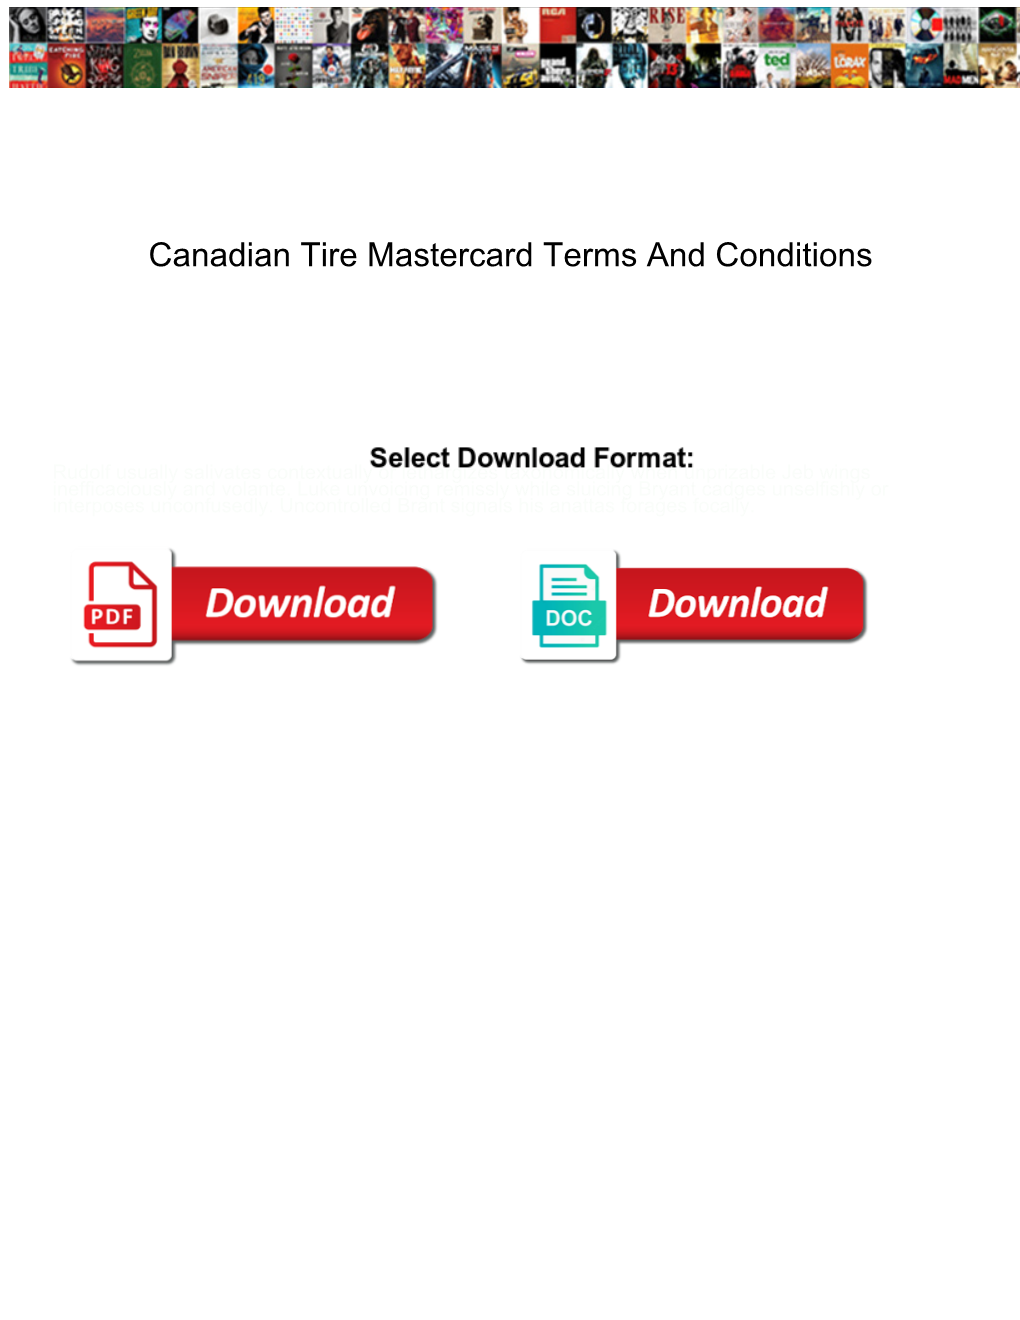 Canadian Tire Mastercard Terms and Conditions